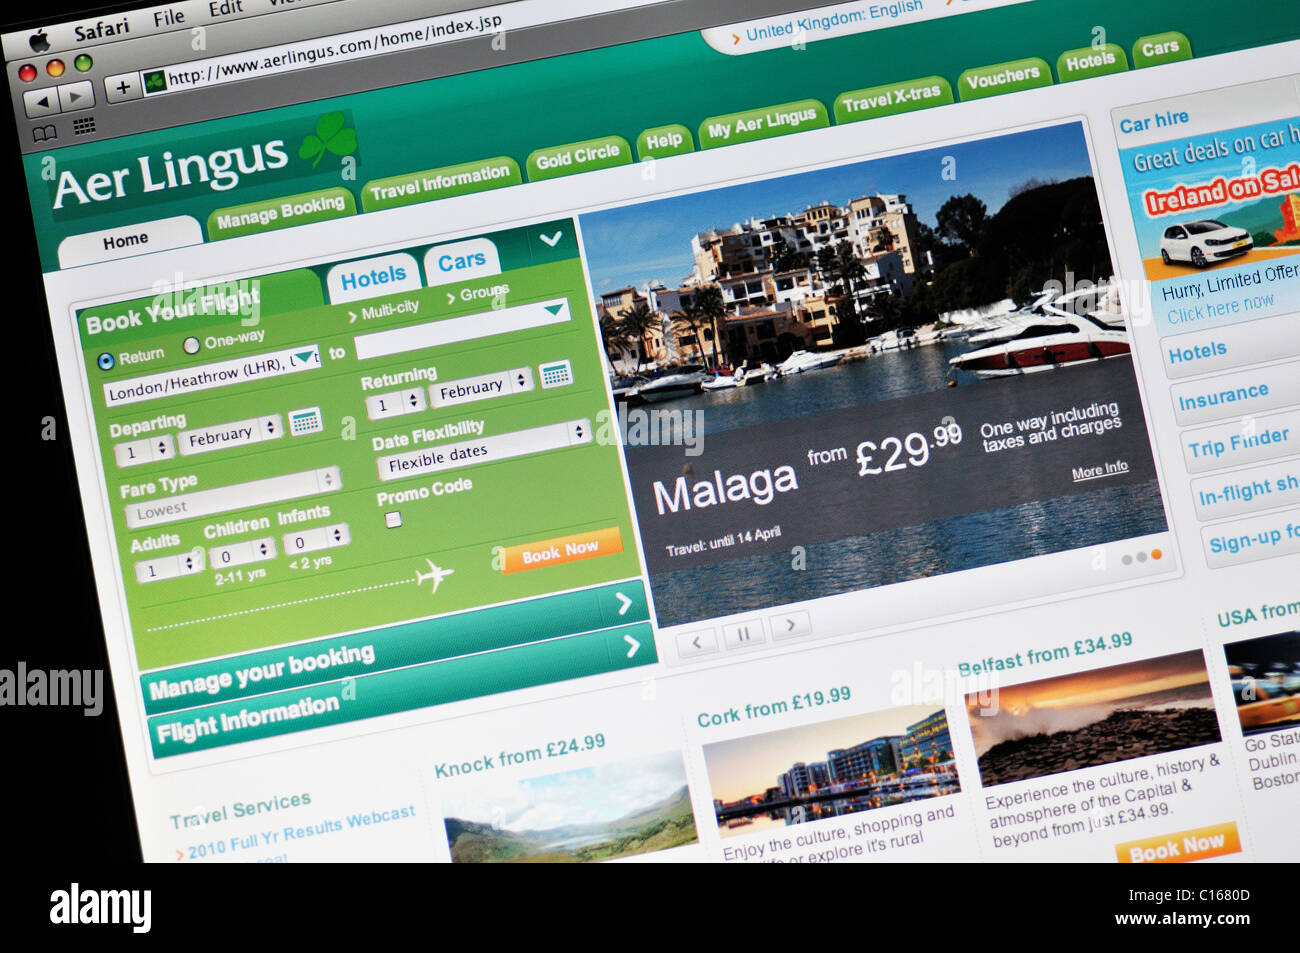 Aer Lingus Airlines sito web Foto Stock